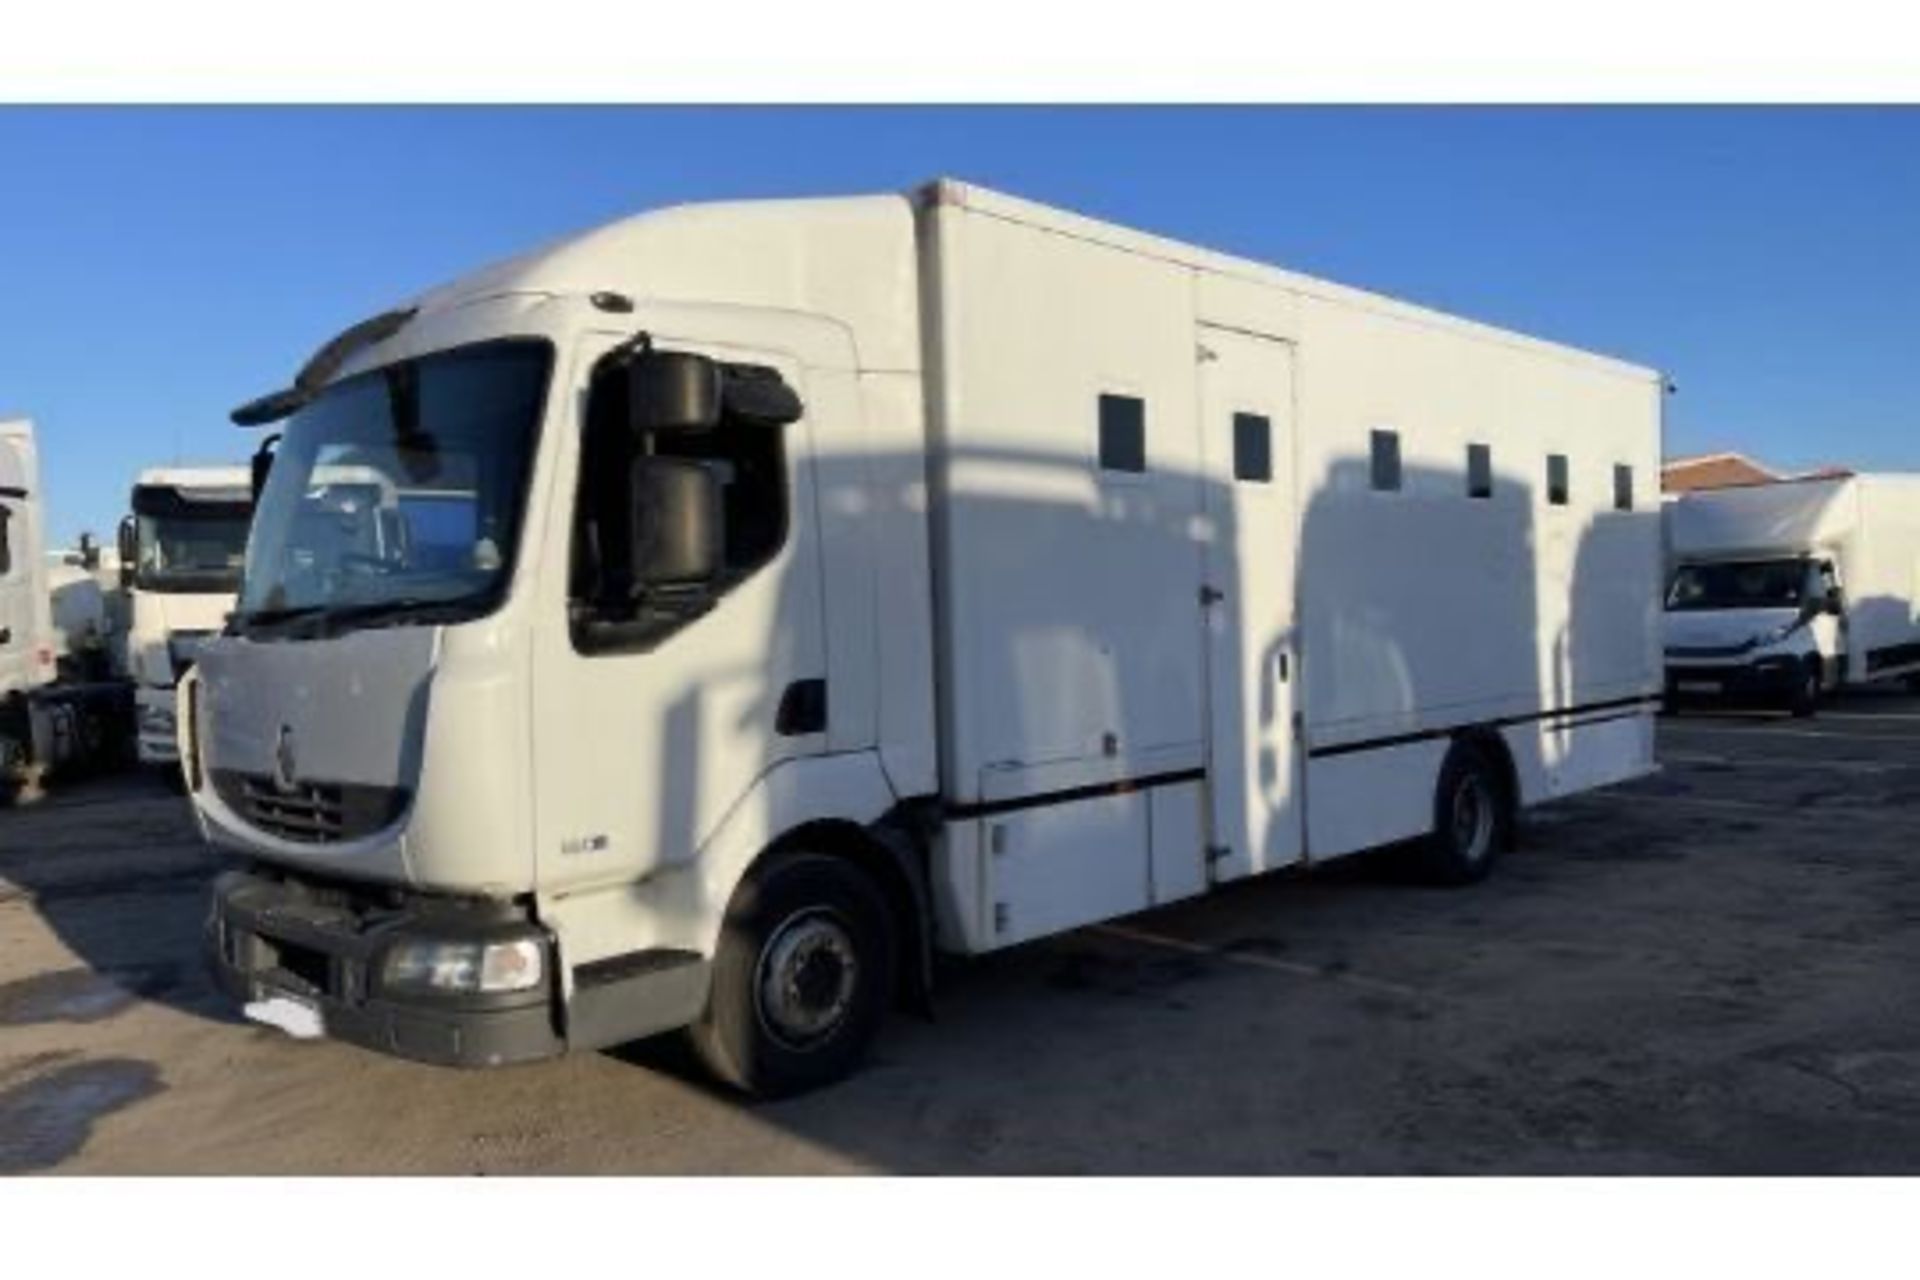 PO11 OXN 2011 RENAULT MIDLUM 180 DXI. MANUAL GEARBOX. DIESEL A/C. REAR VIEW CAMERA. 10 X CELLS. - Image 2 of 23